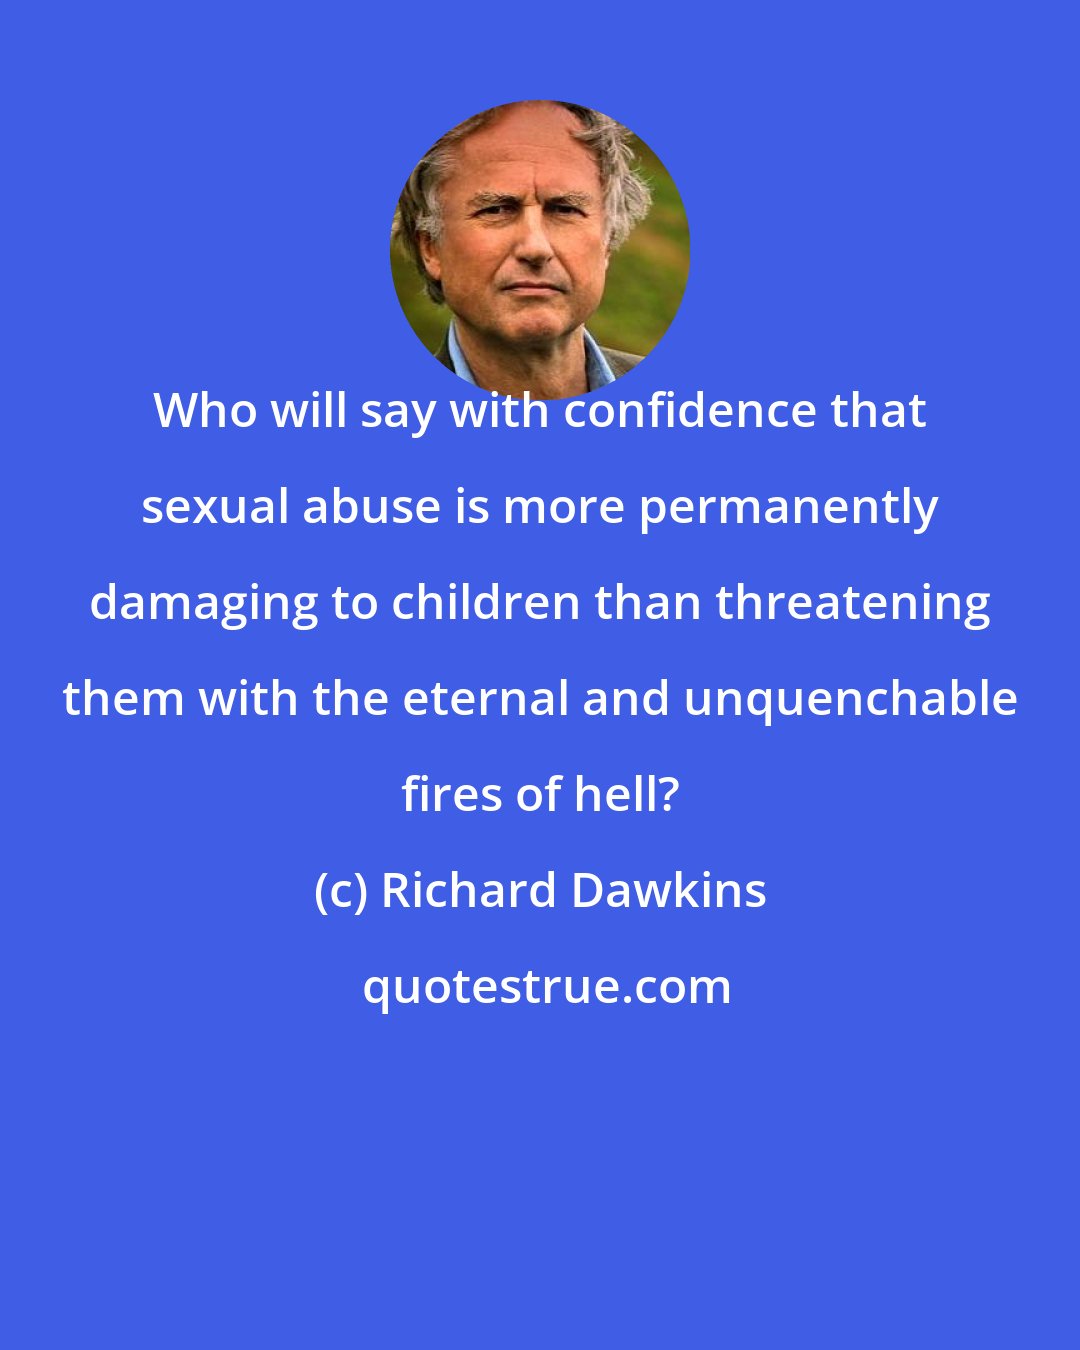 Richard Dawkins: Who will say with confidence that sexual abuse is more permanently damaging to children than threatening them with the eternal and unquenchable fires of hell?